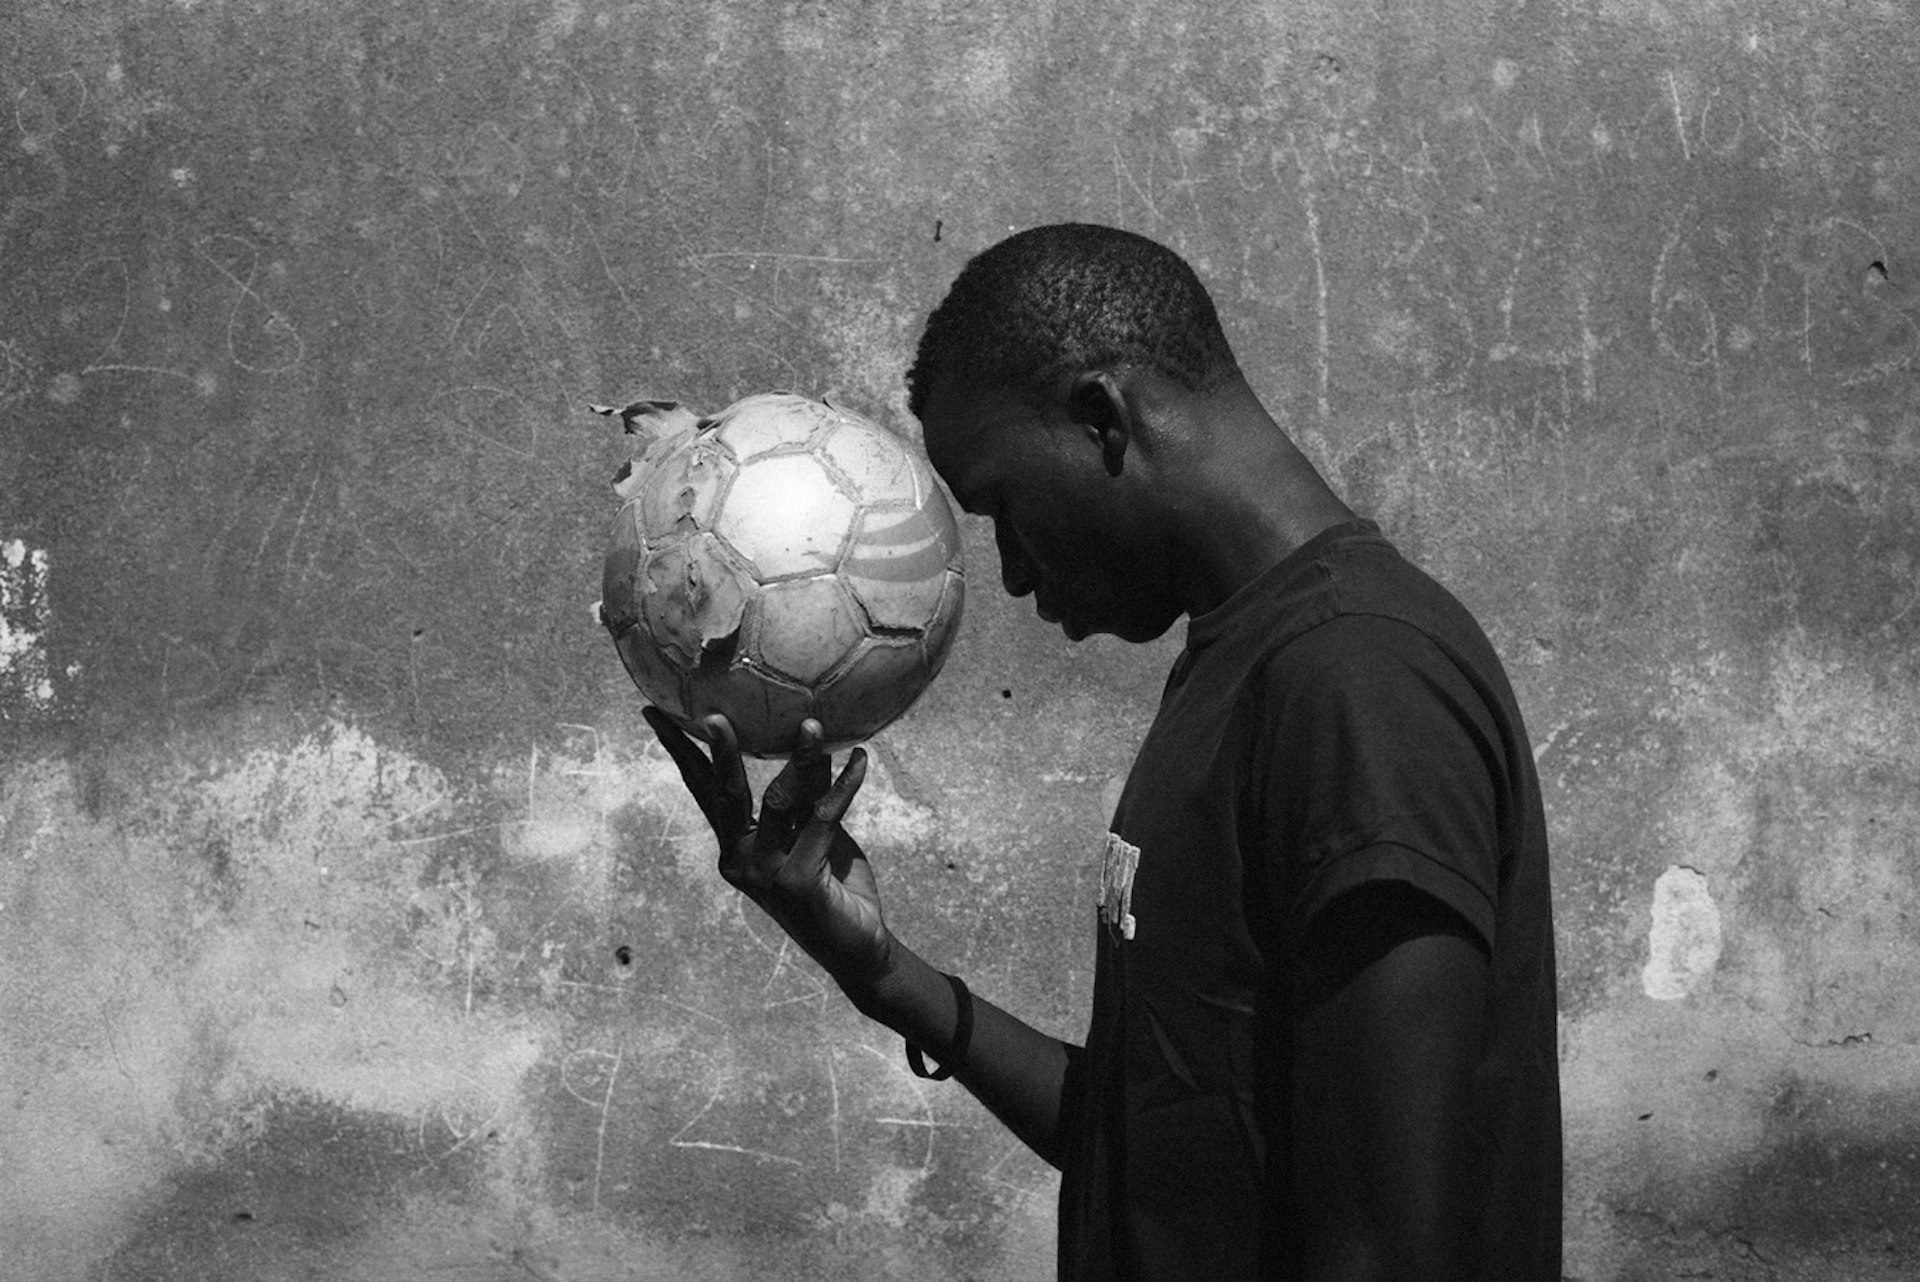 Y. 17 years old from Mali. The Soccer Player.